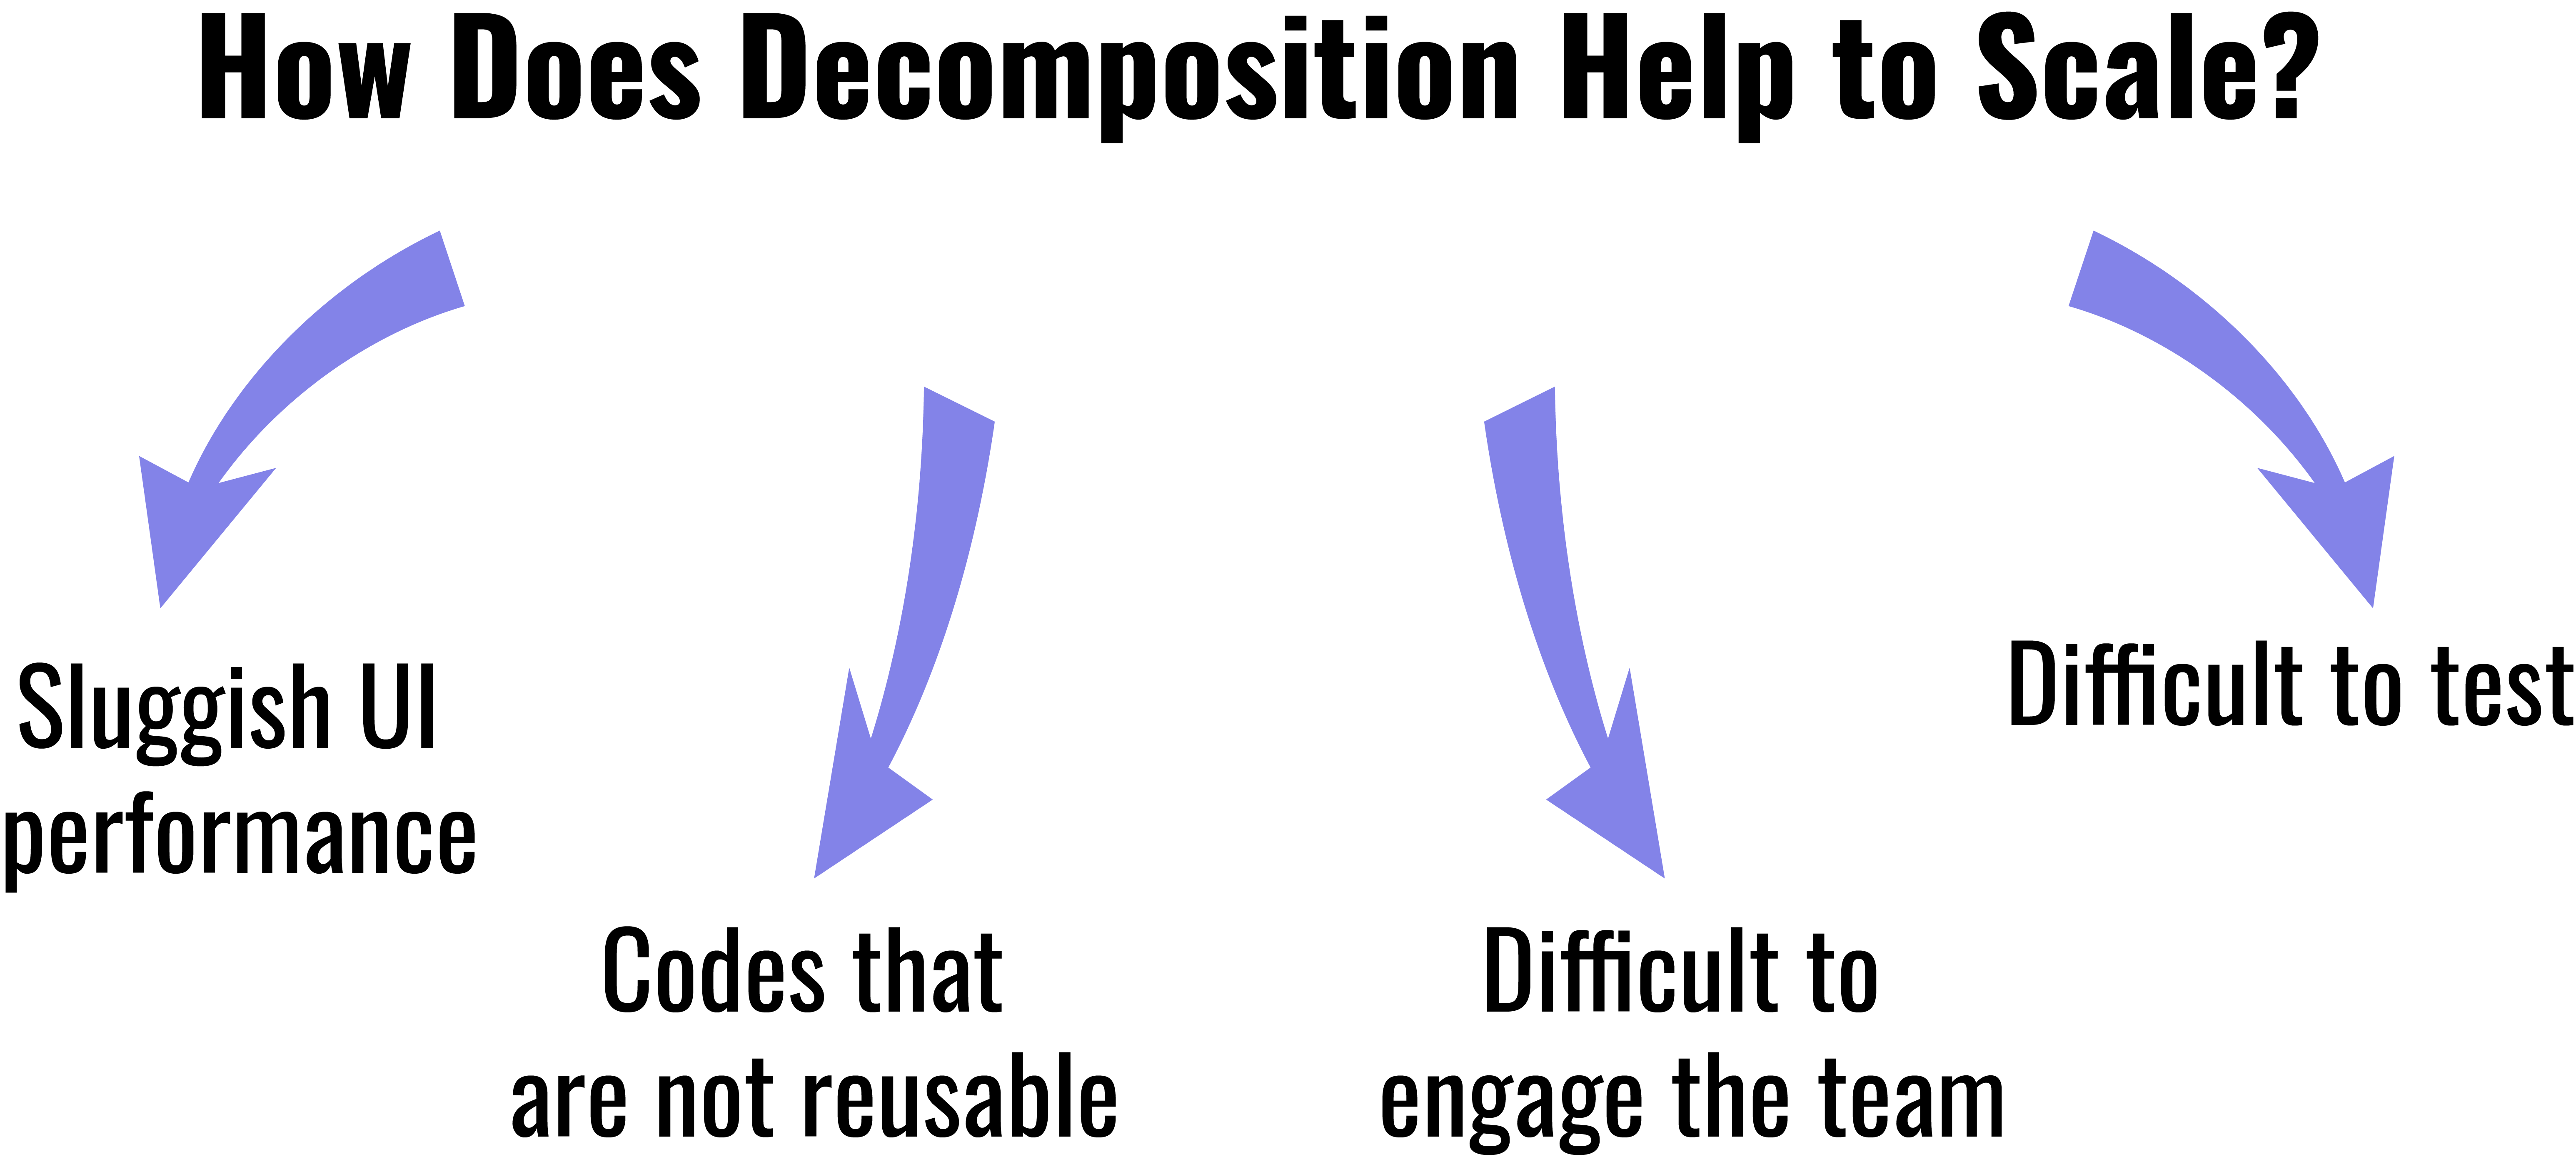 How does decomposition help to scale